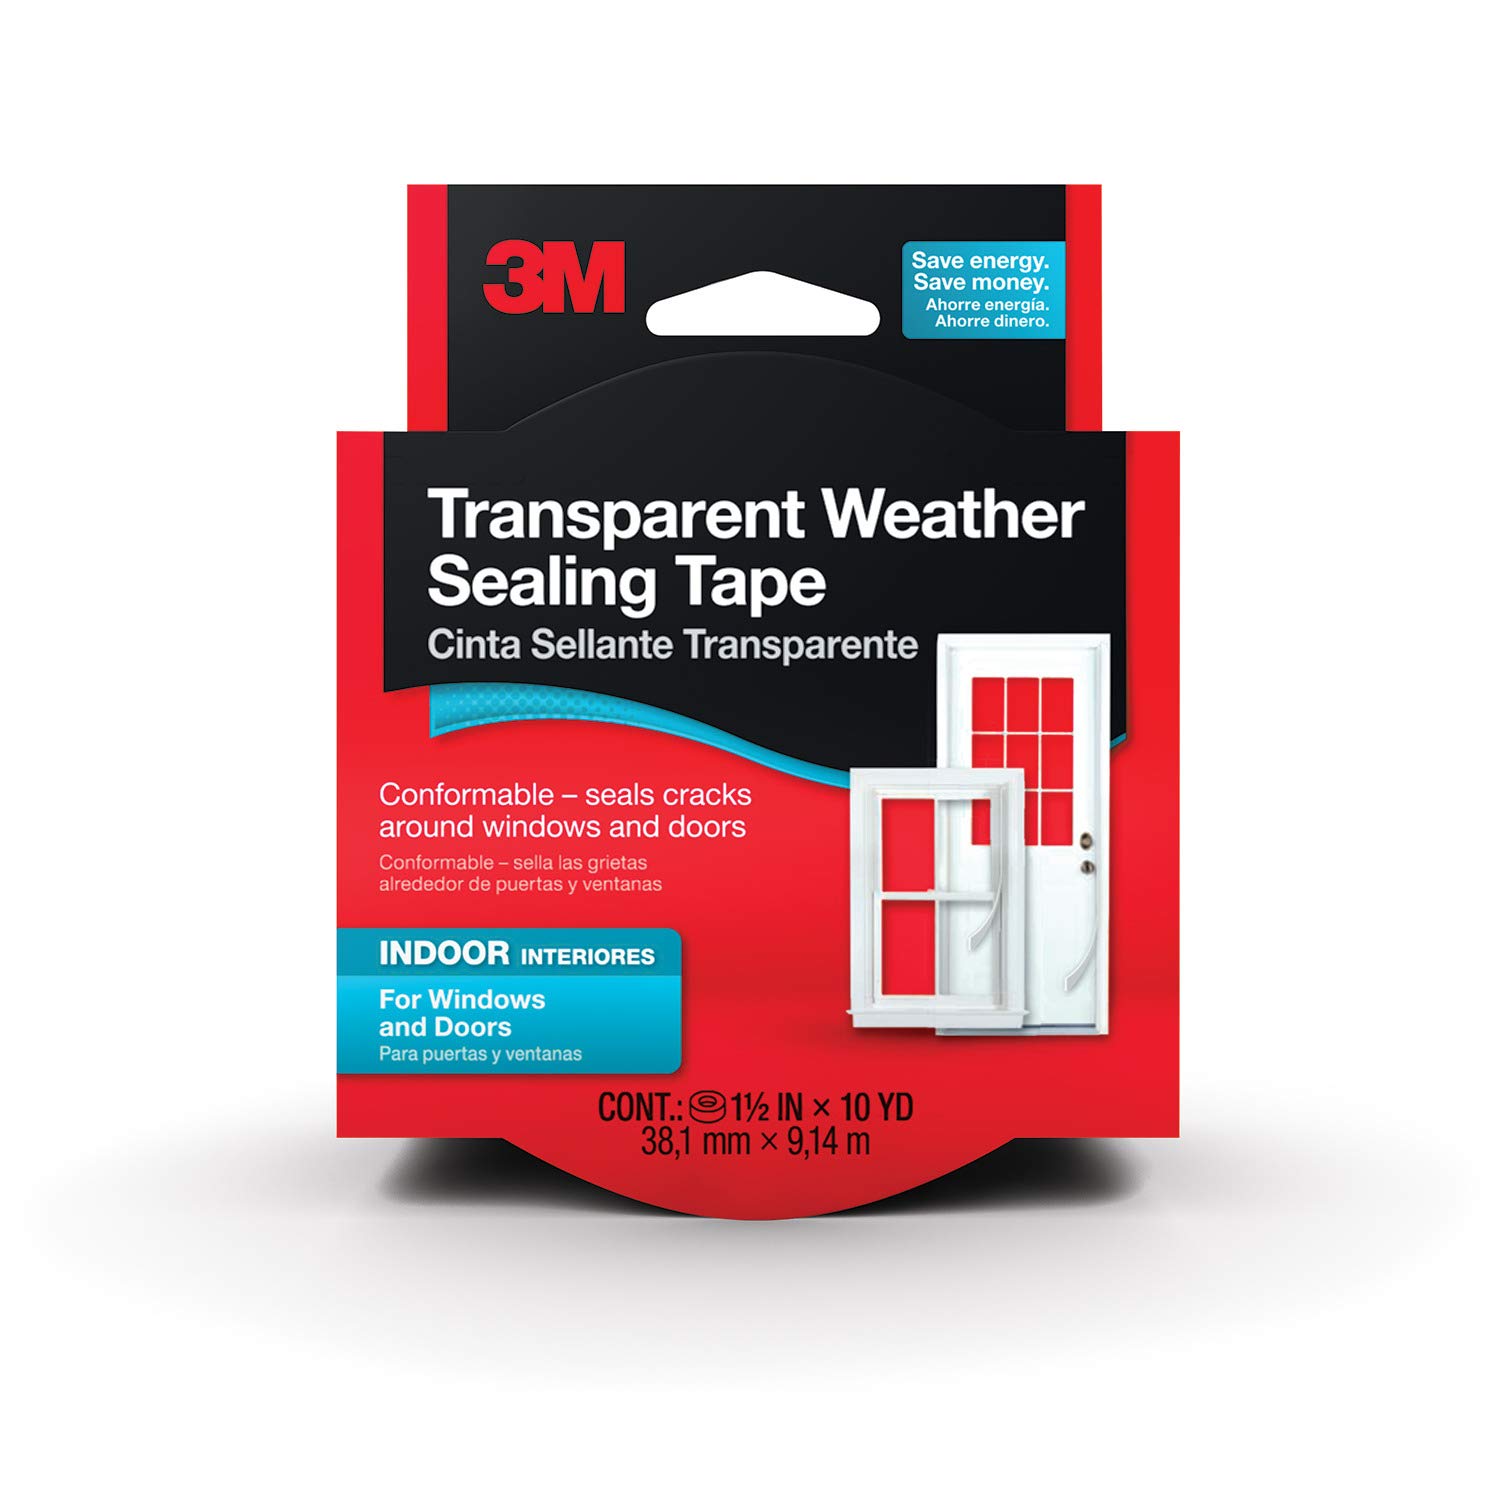 3M Interior Transparent Weather Sealing Tape for Windows and Doors\ Moisture Resistant Tape\ 1.5 in. x 10 yd. Roll